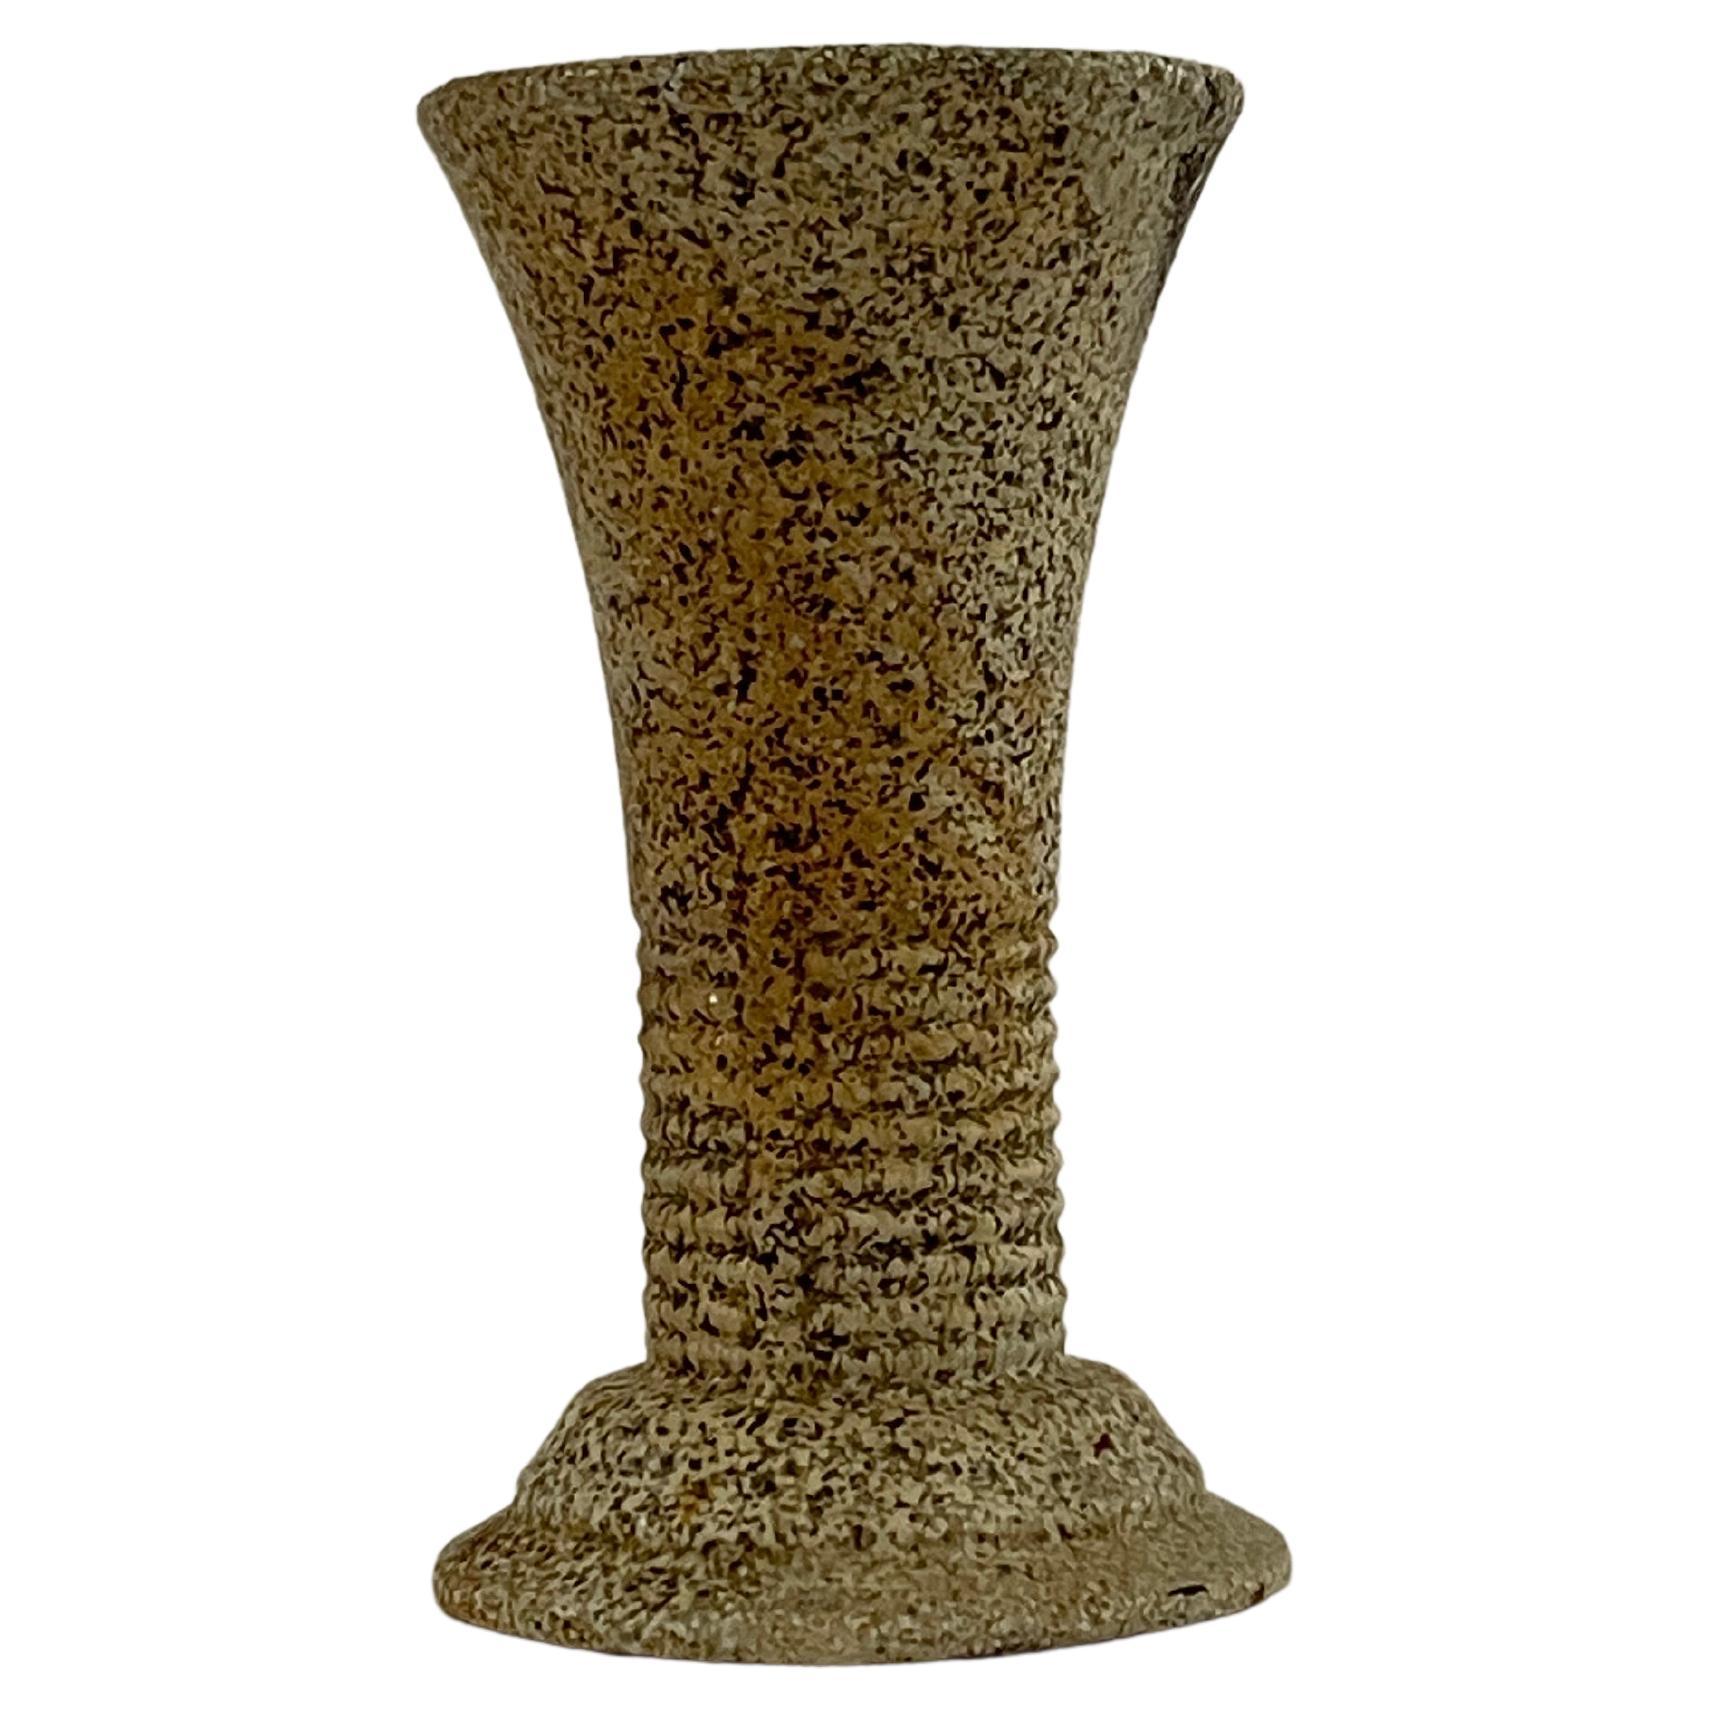 20th Century Metal textured vase with a heavy weight and fluted base and opening. Ribbed shaft and hand painted textured body.